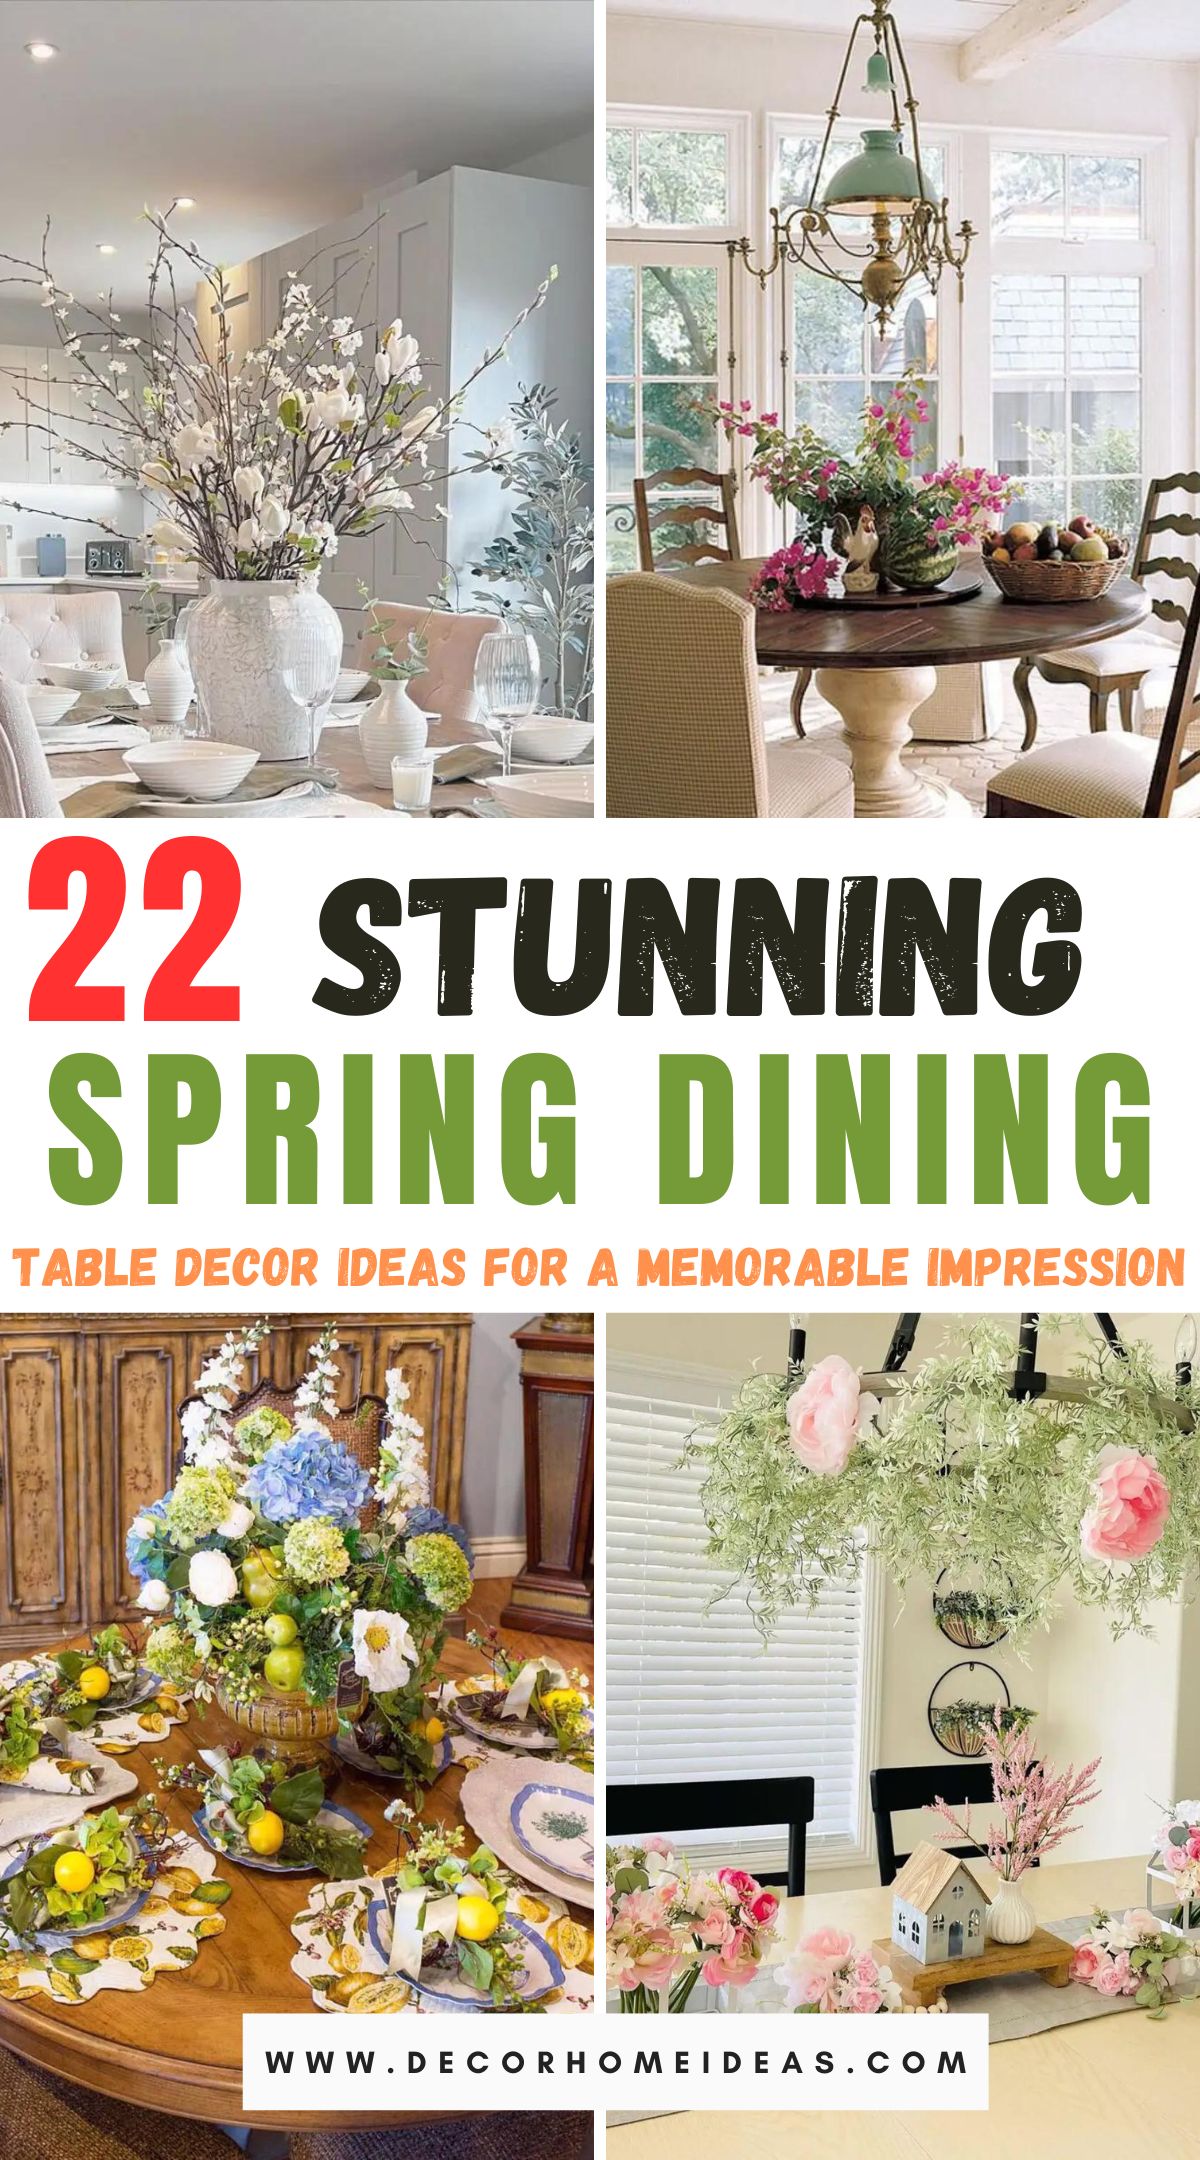 Make a fantastic first impression this spring with our collection of 22 dining table decor ideas. Elevate your dining experience with creative and fresh spring-inspired designs that welcome the season's beauty into your home.